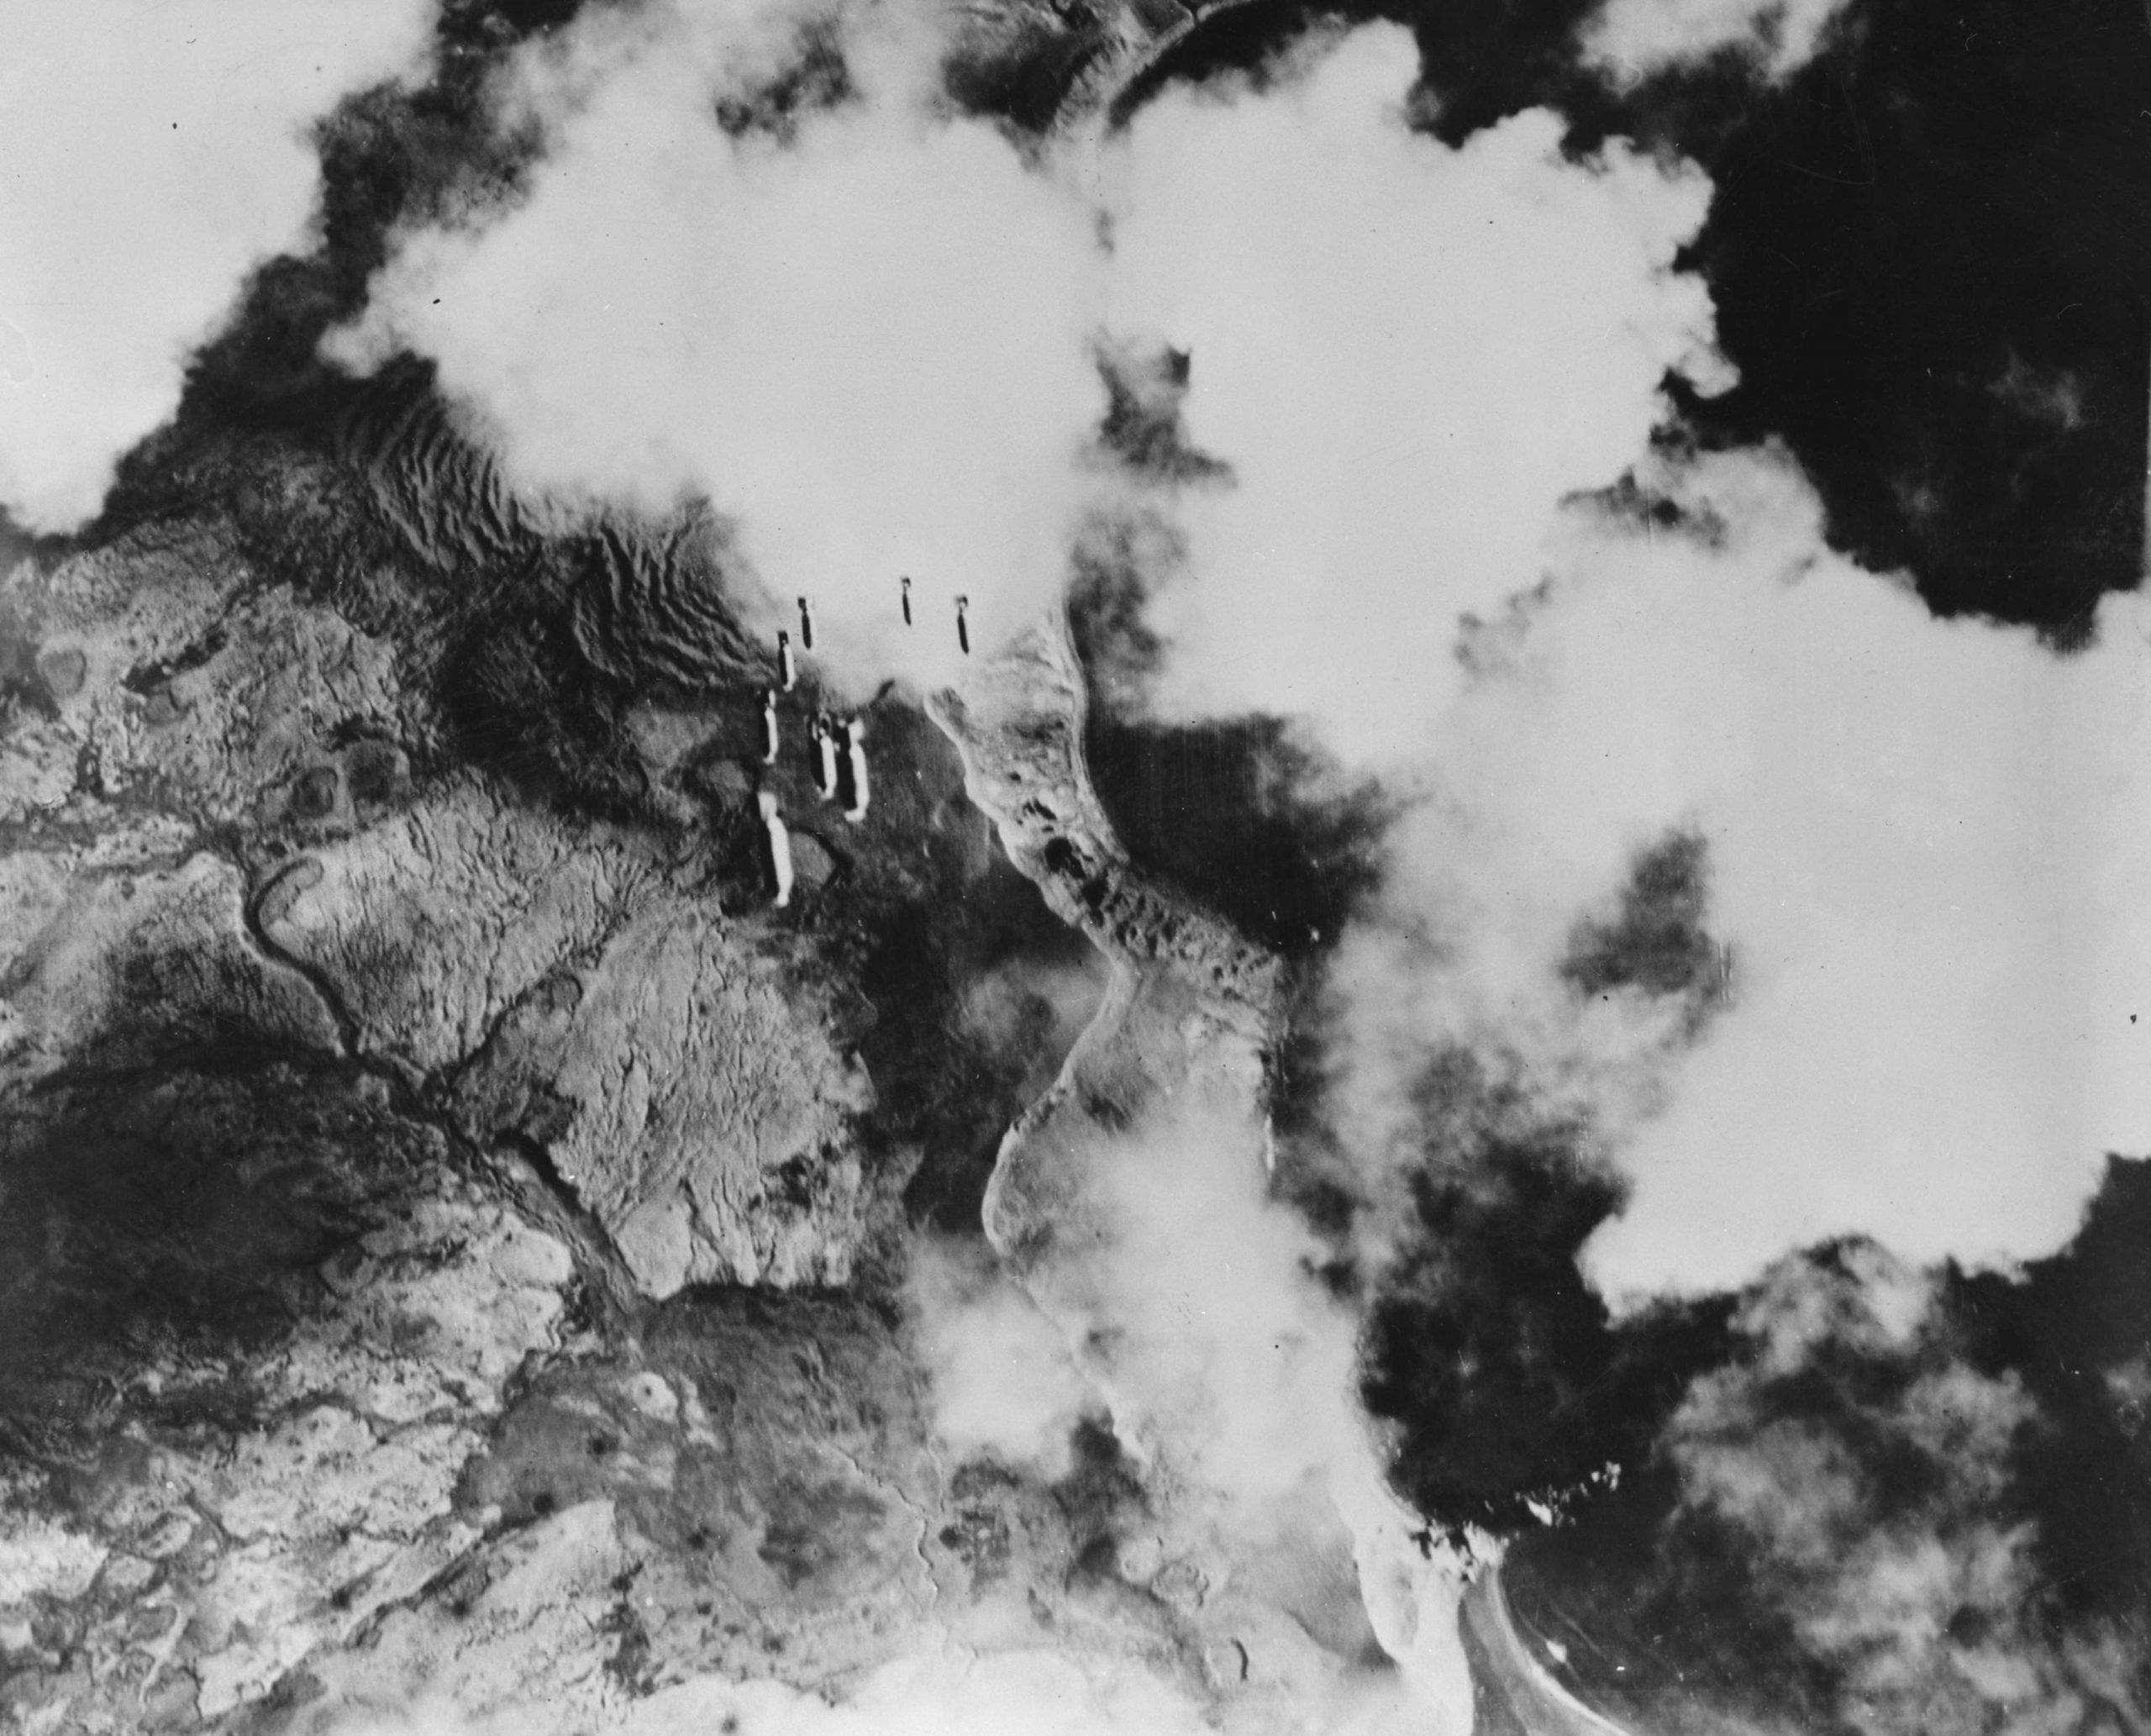 Aerial view of the bombing of the Japanese base Kiska